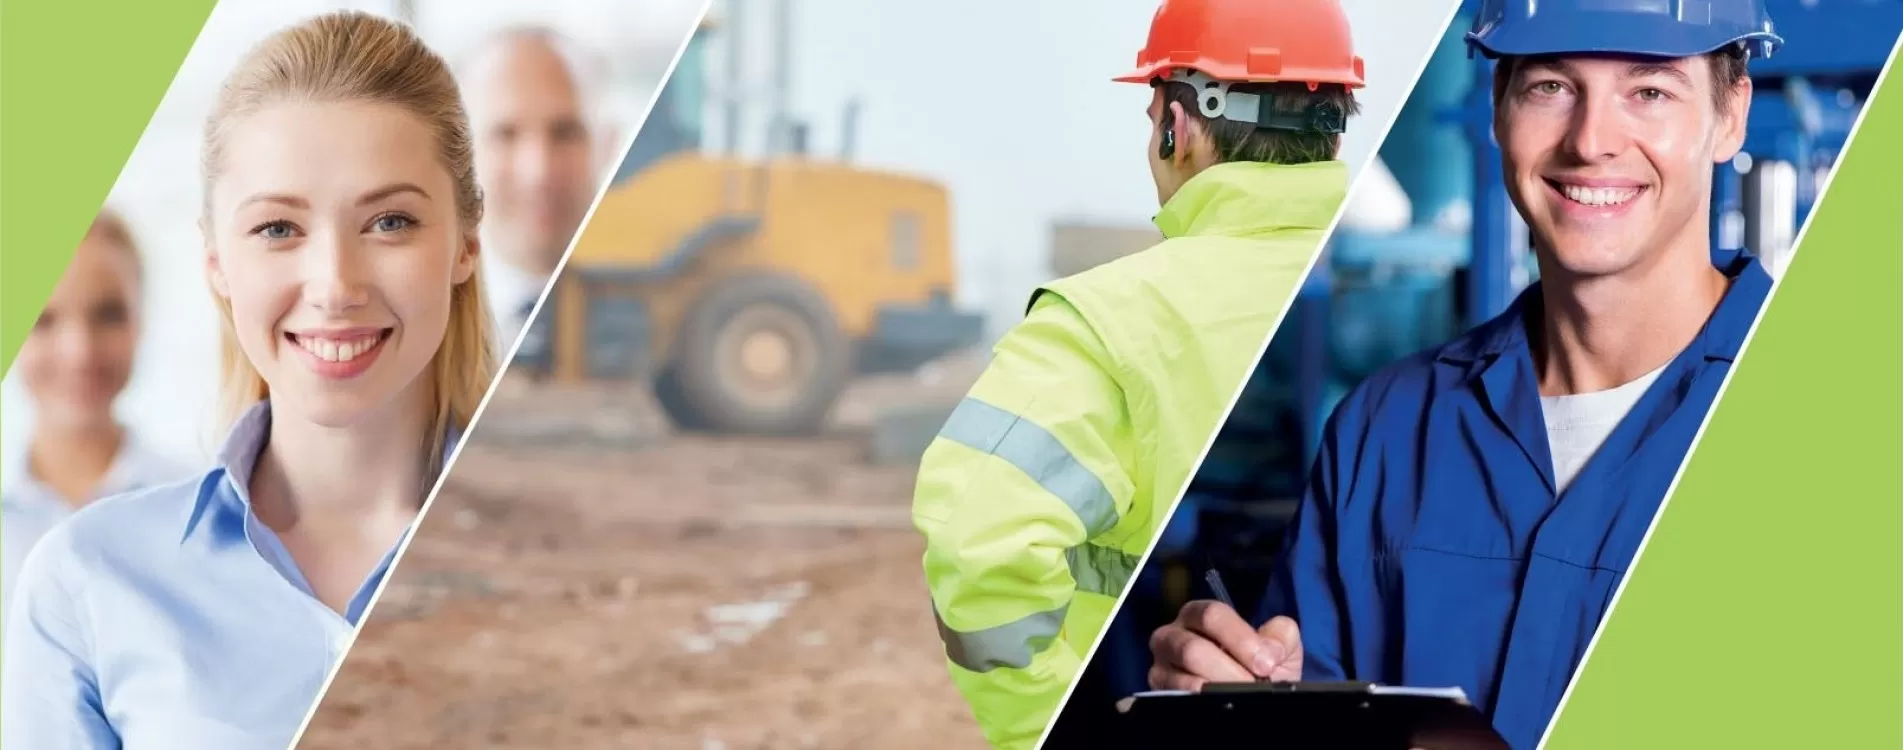 Health & Safety Consultancy Services in Wolverhampton